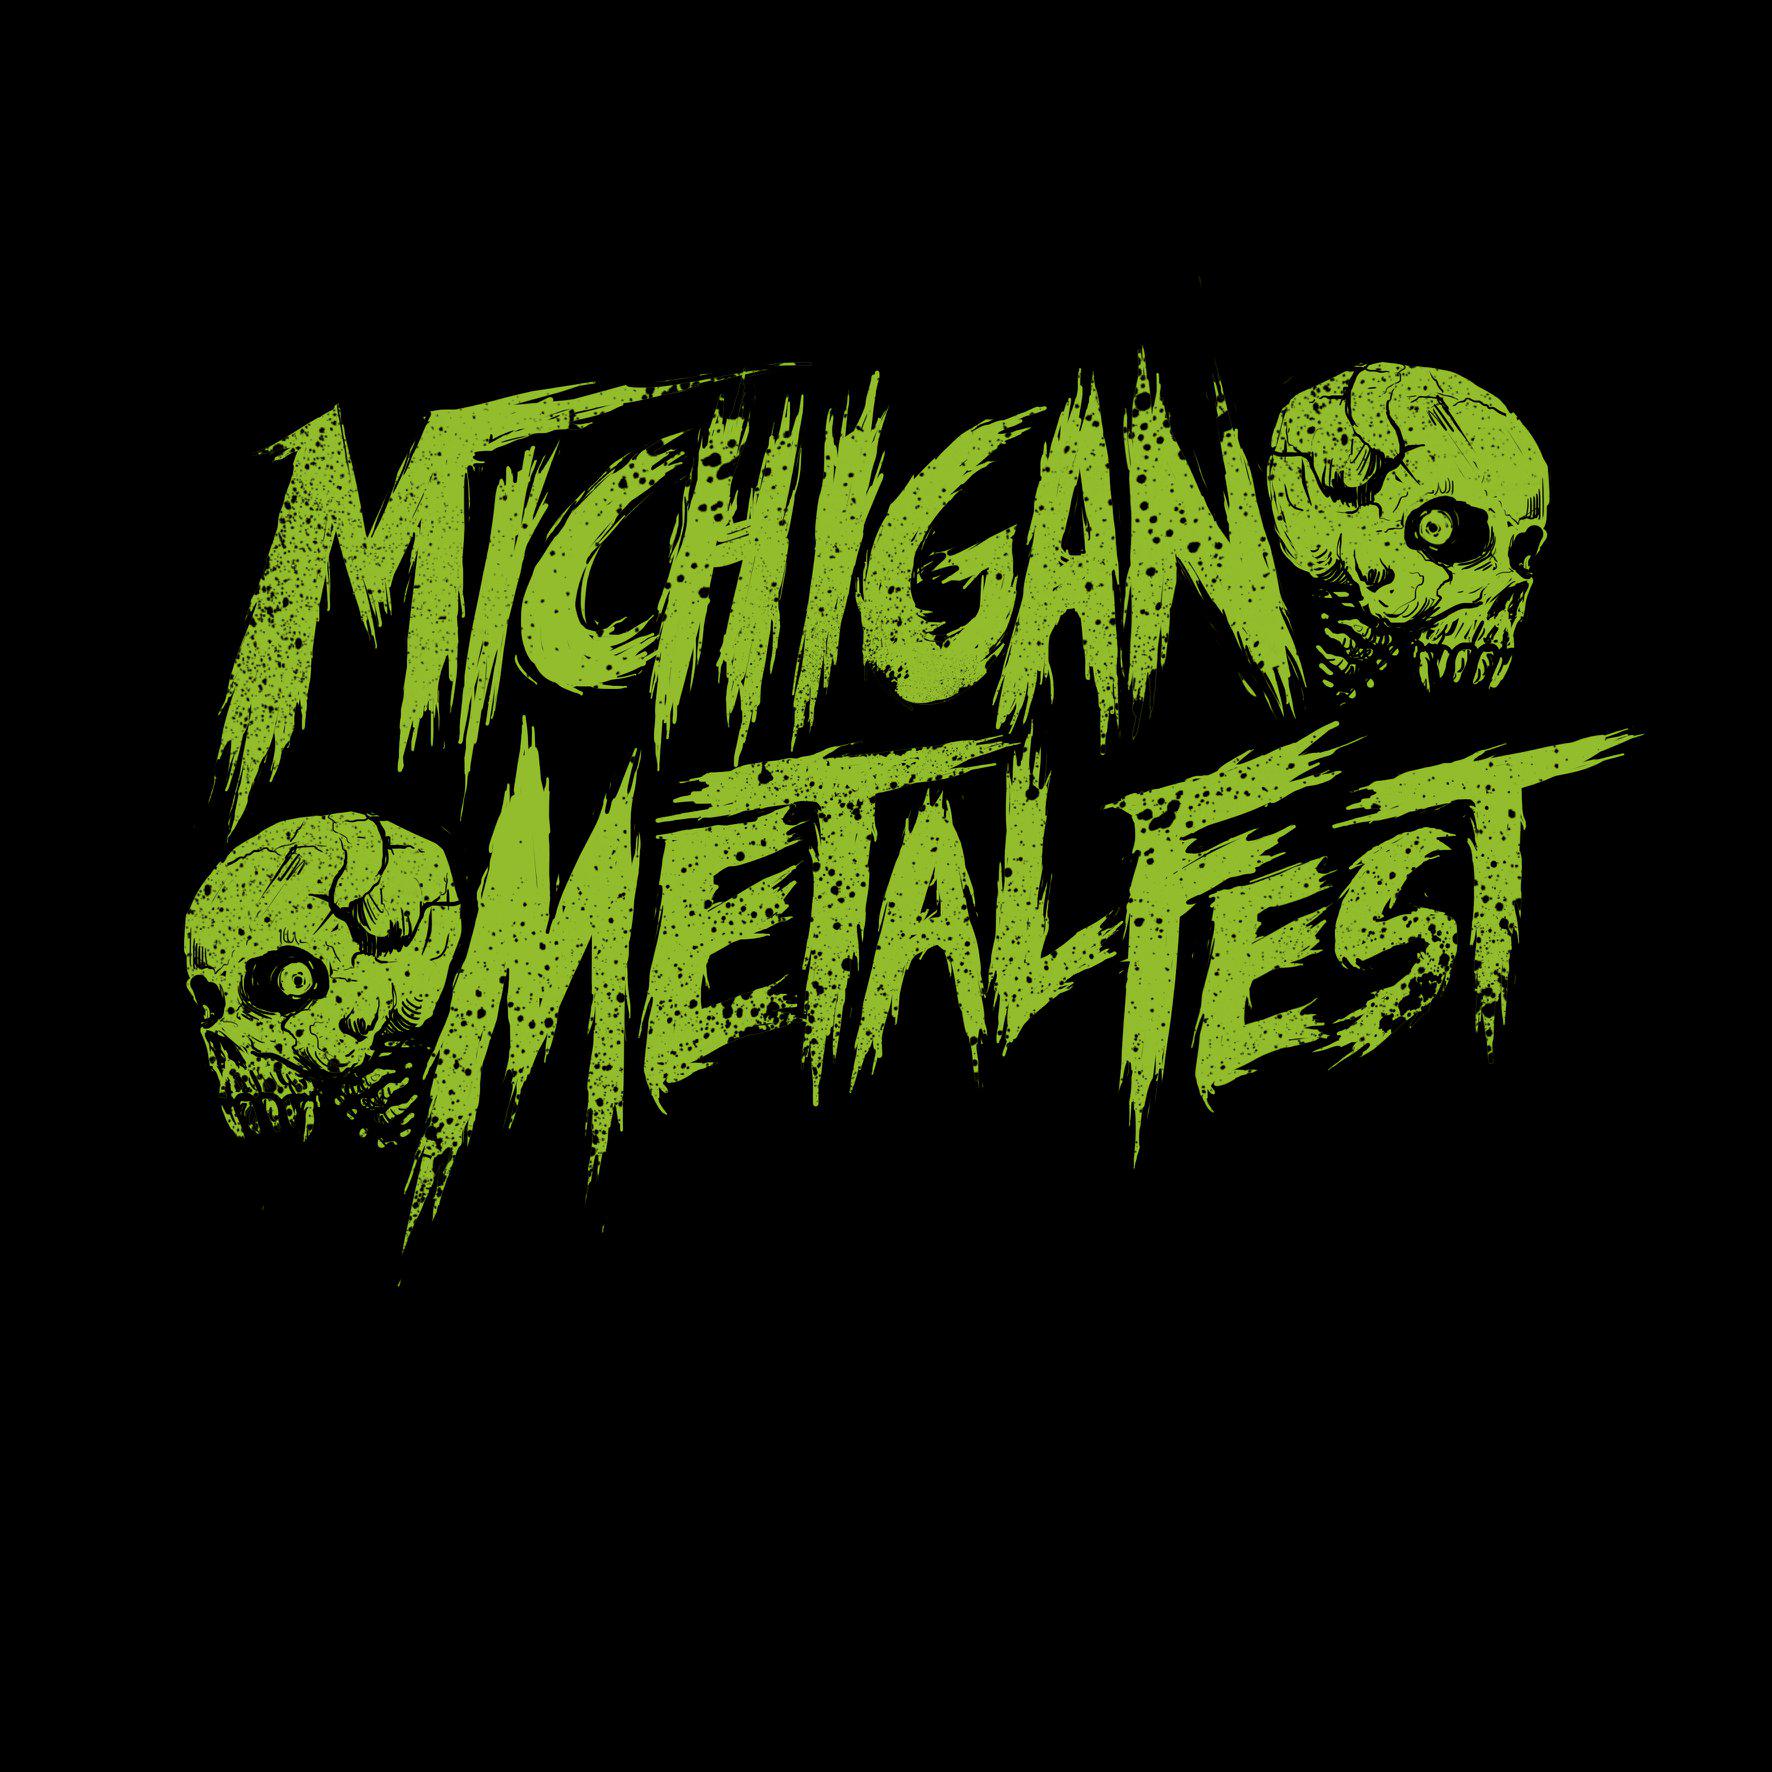 Michigan Metal Fest Festival Lineup, Dates and Location